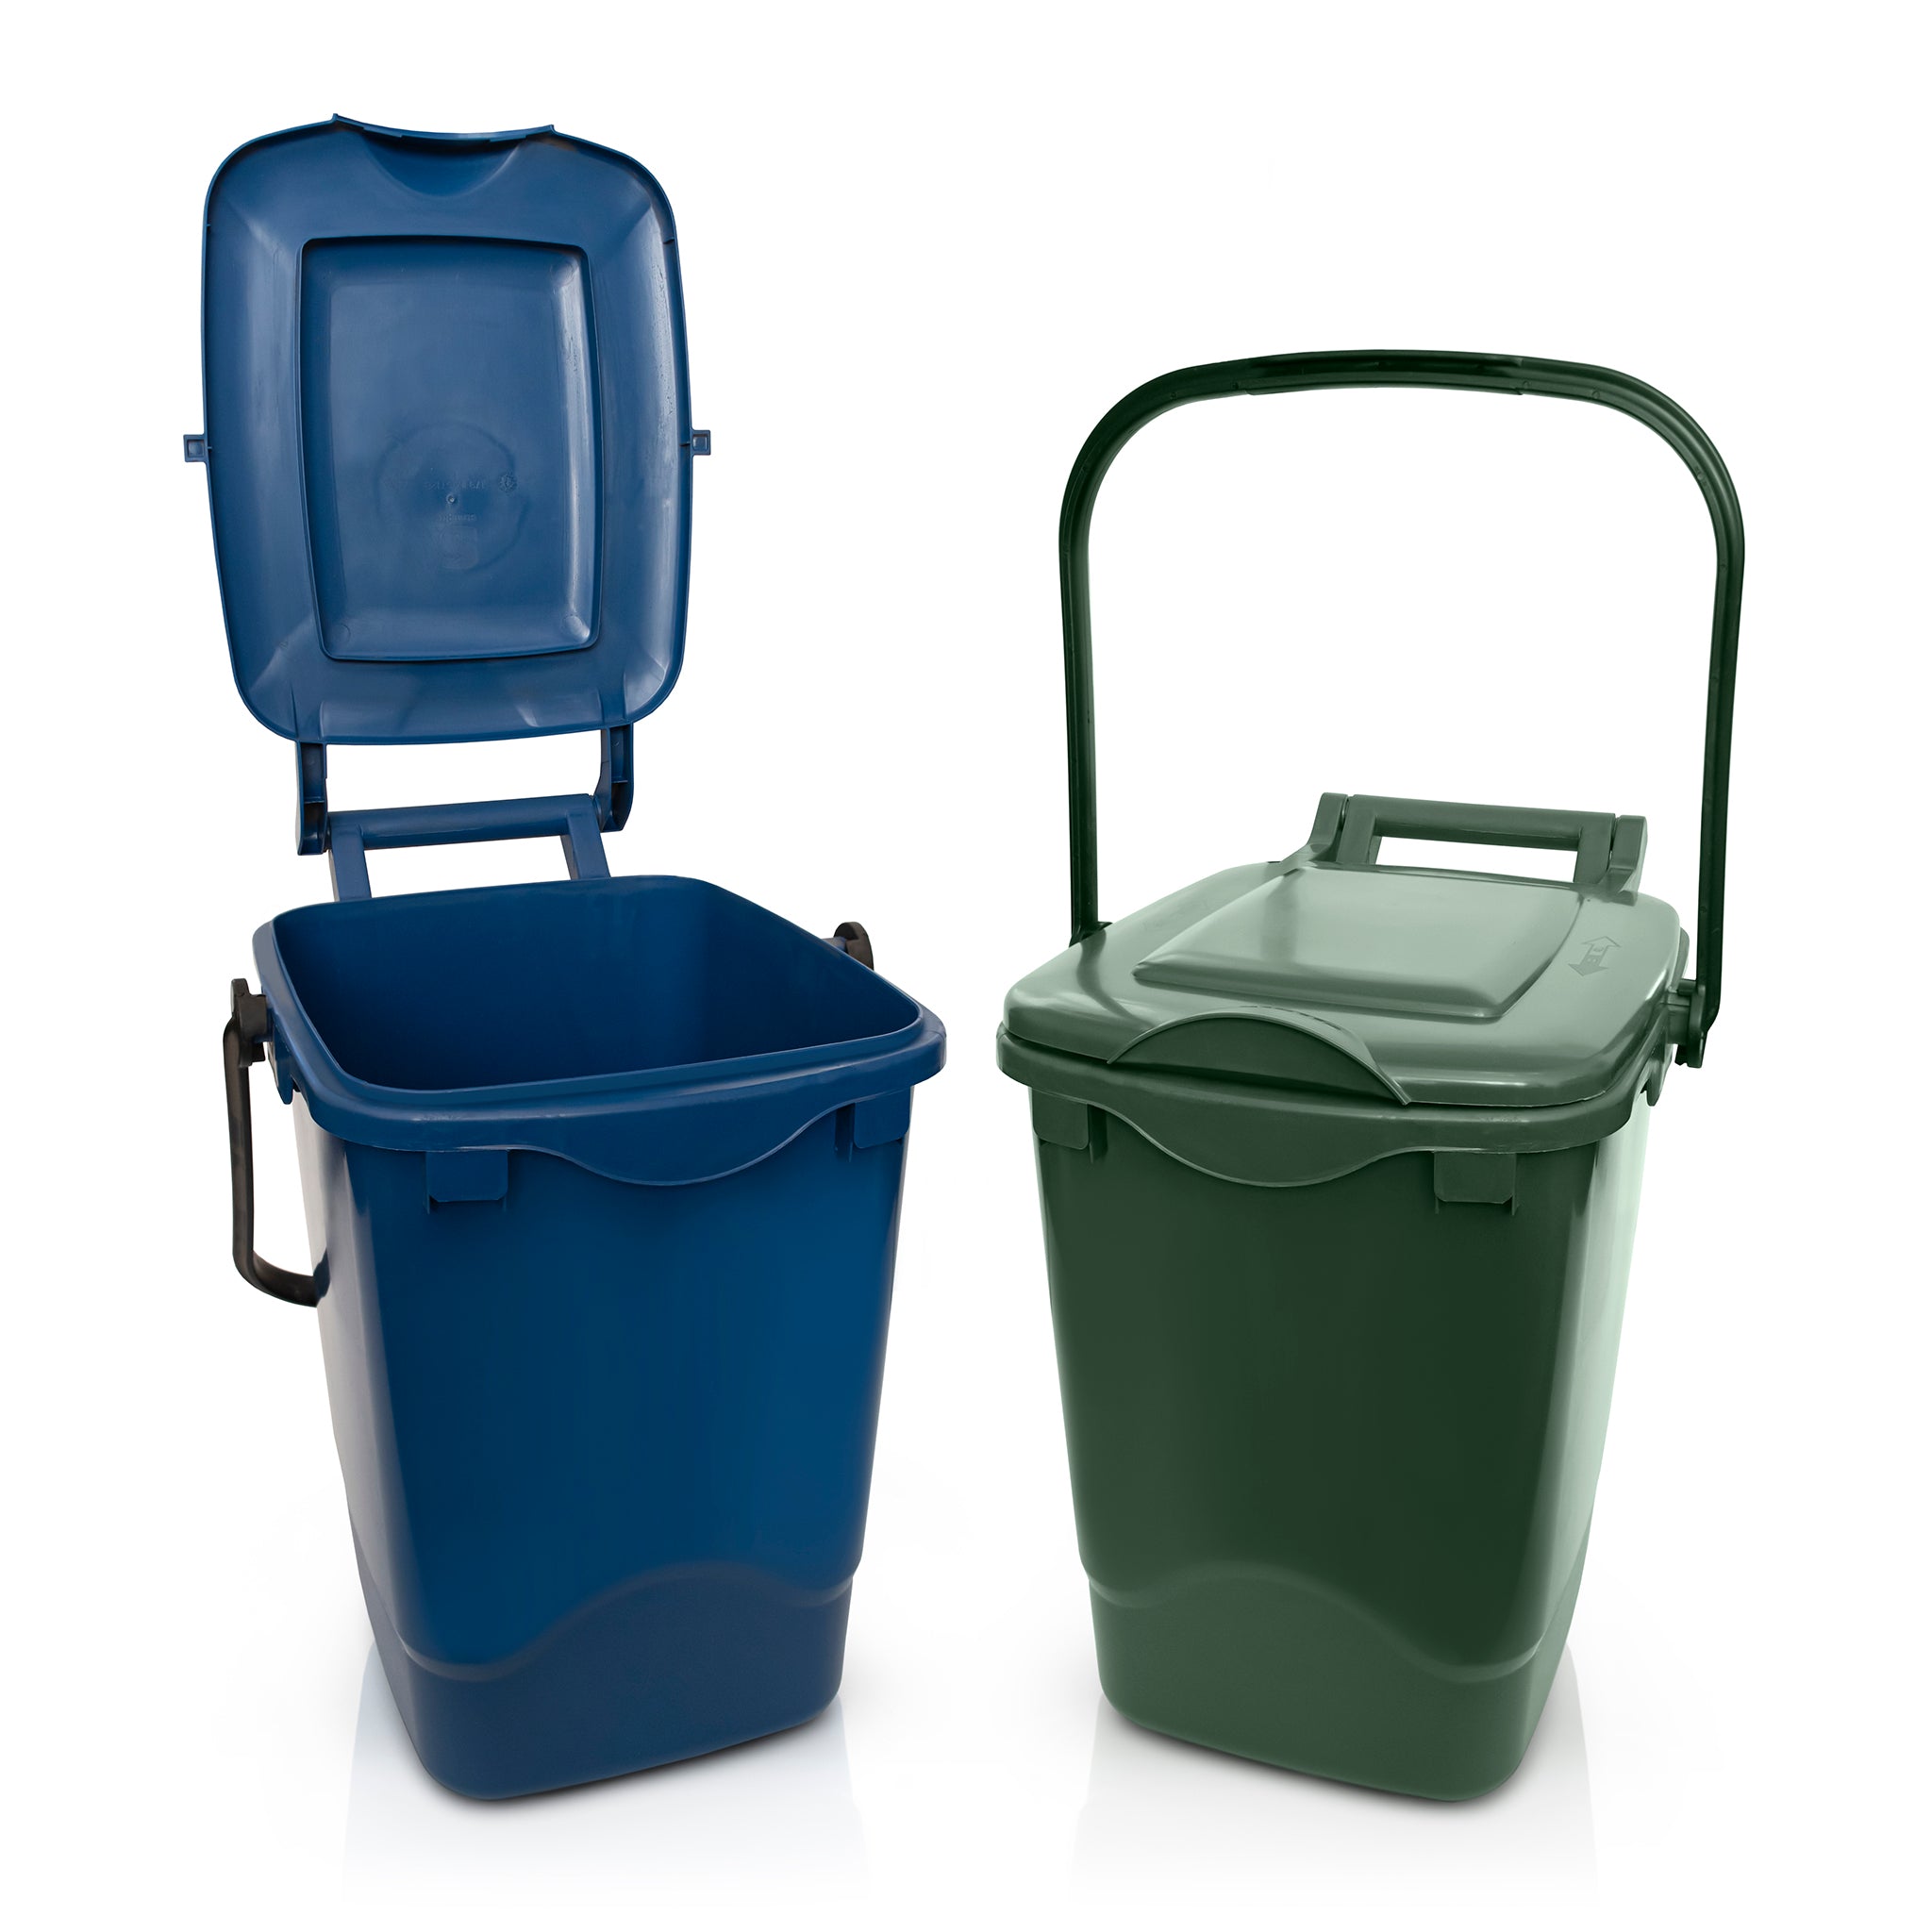 Green and blue 23 litre nappy bins made from recycled plastic